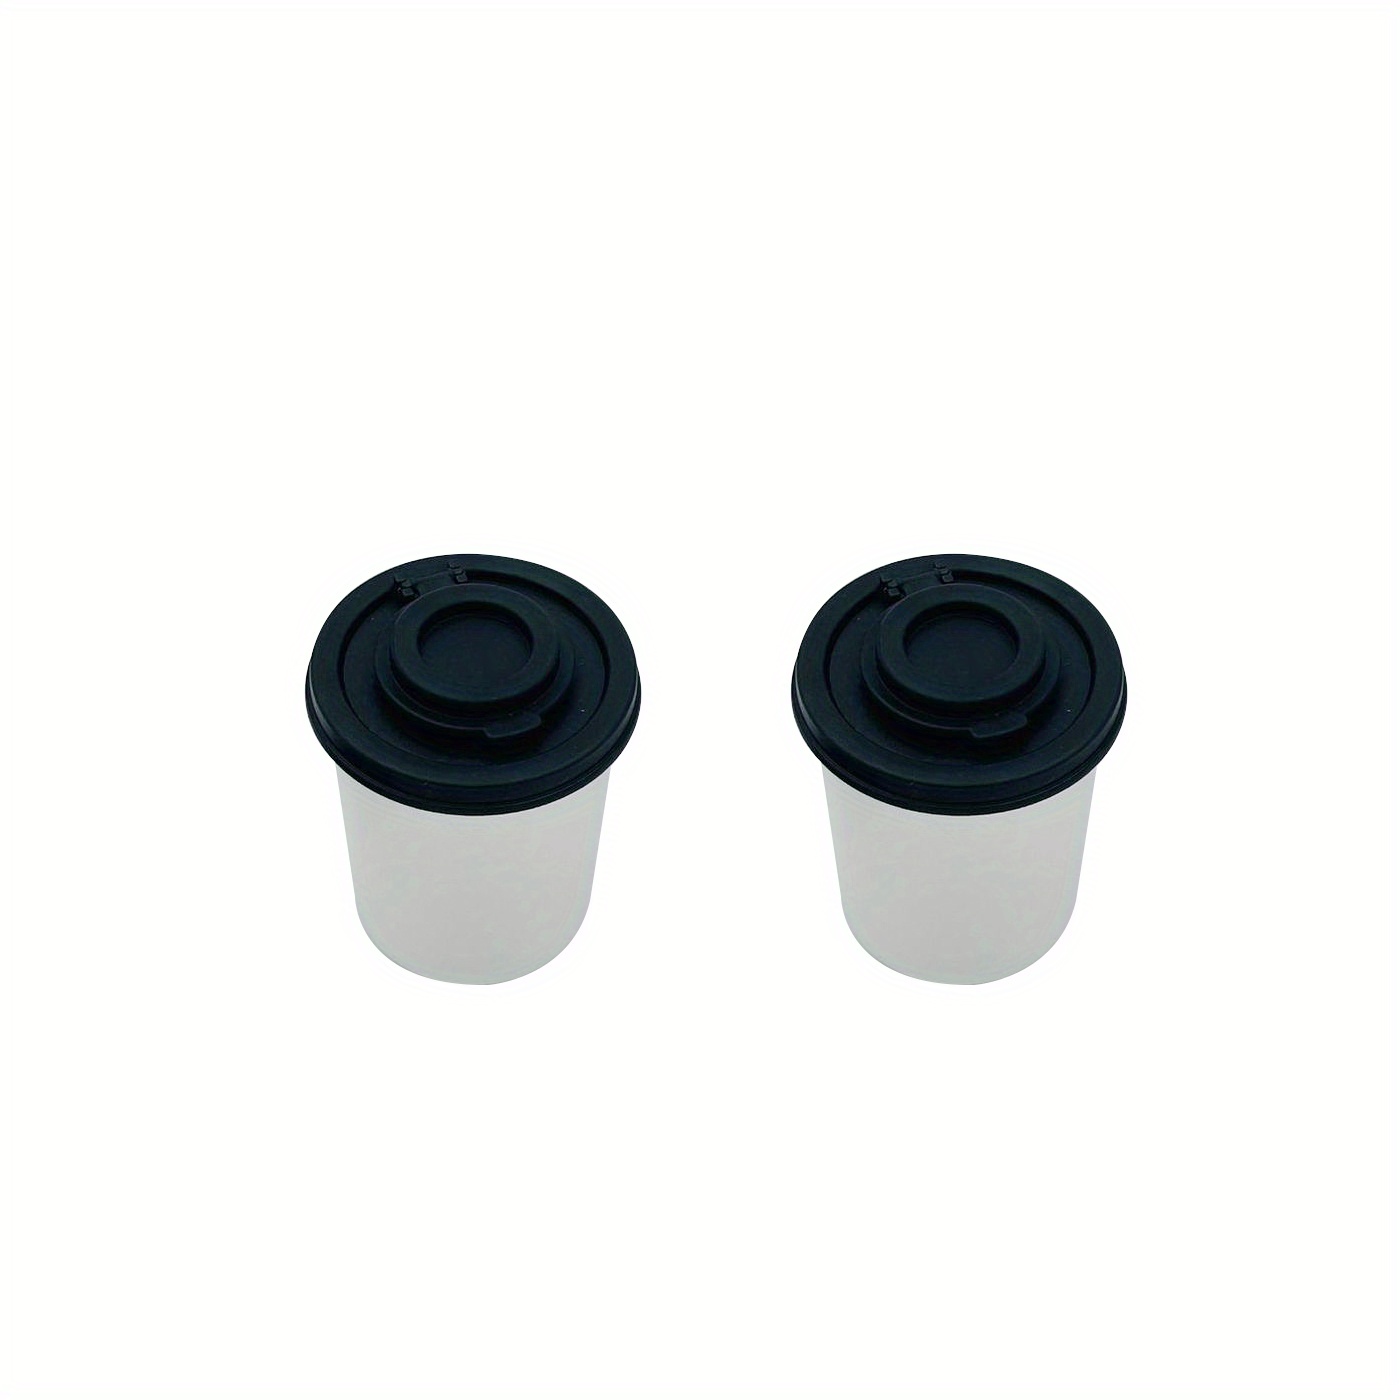 6 Pack 8oz Plastic Spice Jars with Black Cap and Shaker Lids for